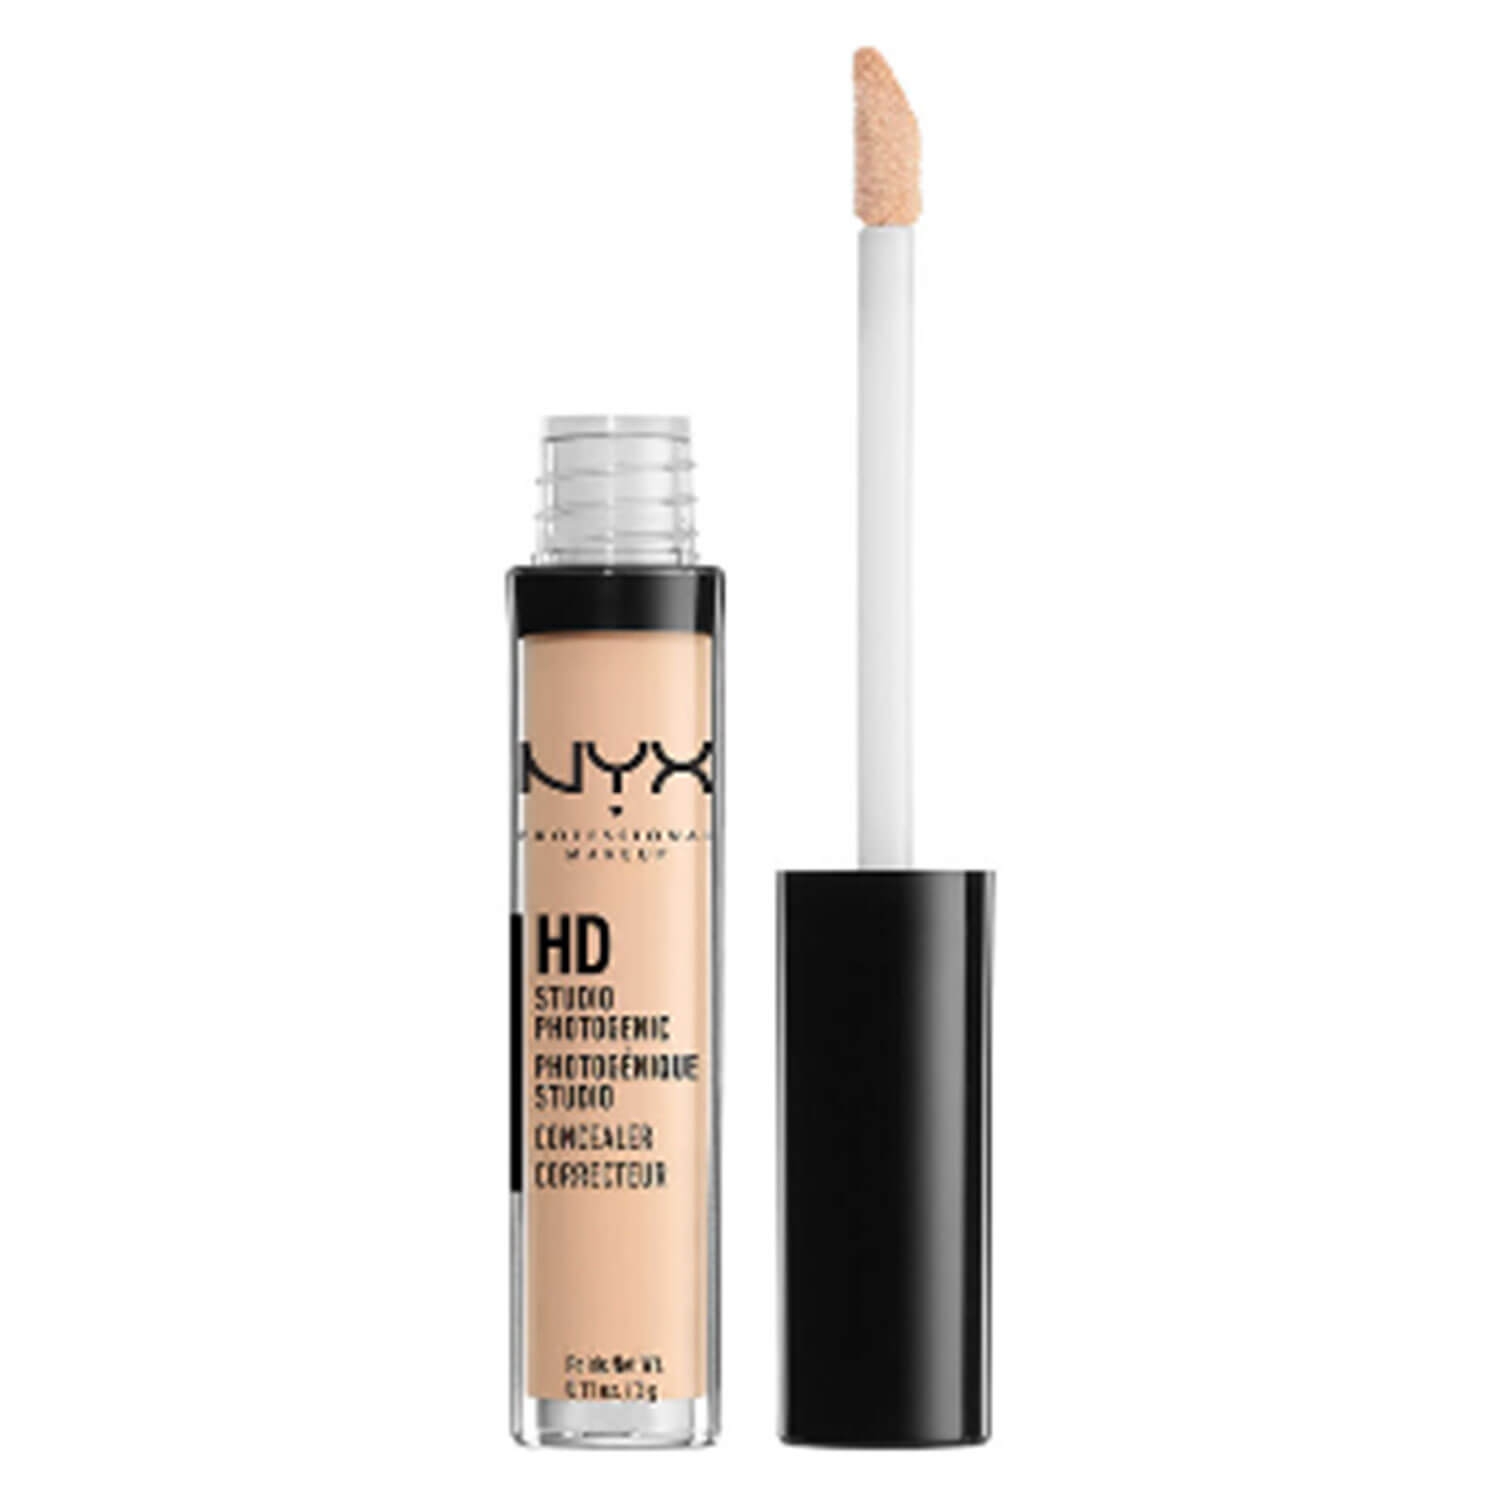 Product image from NYX Concealer - HD Photogenic Wand Light